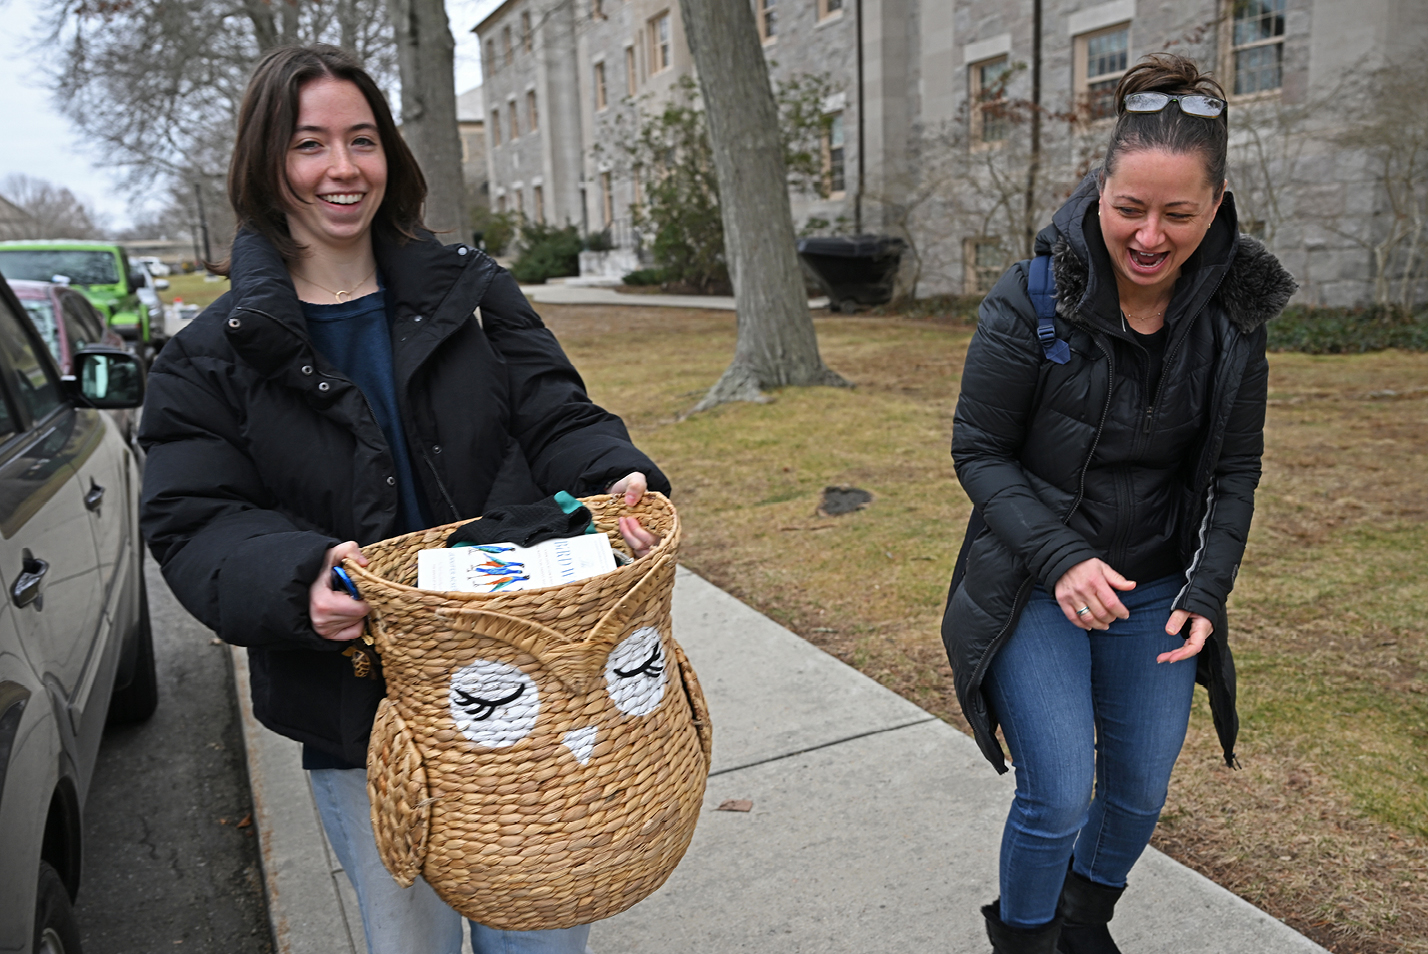 A student and her mom carry personal belongings into a dorm.